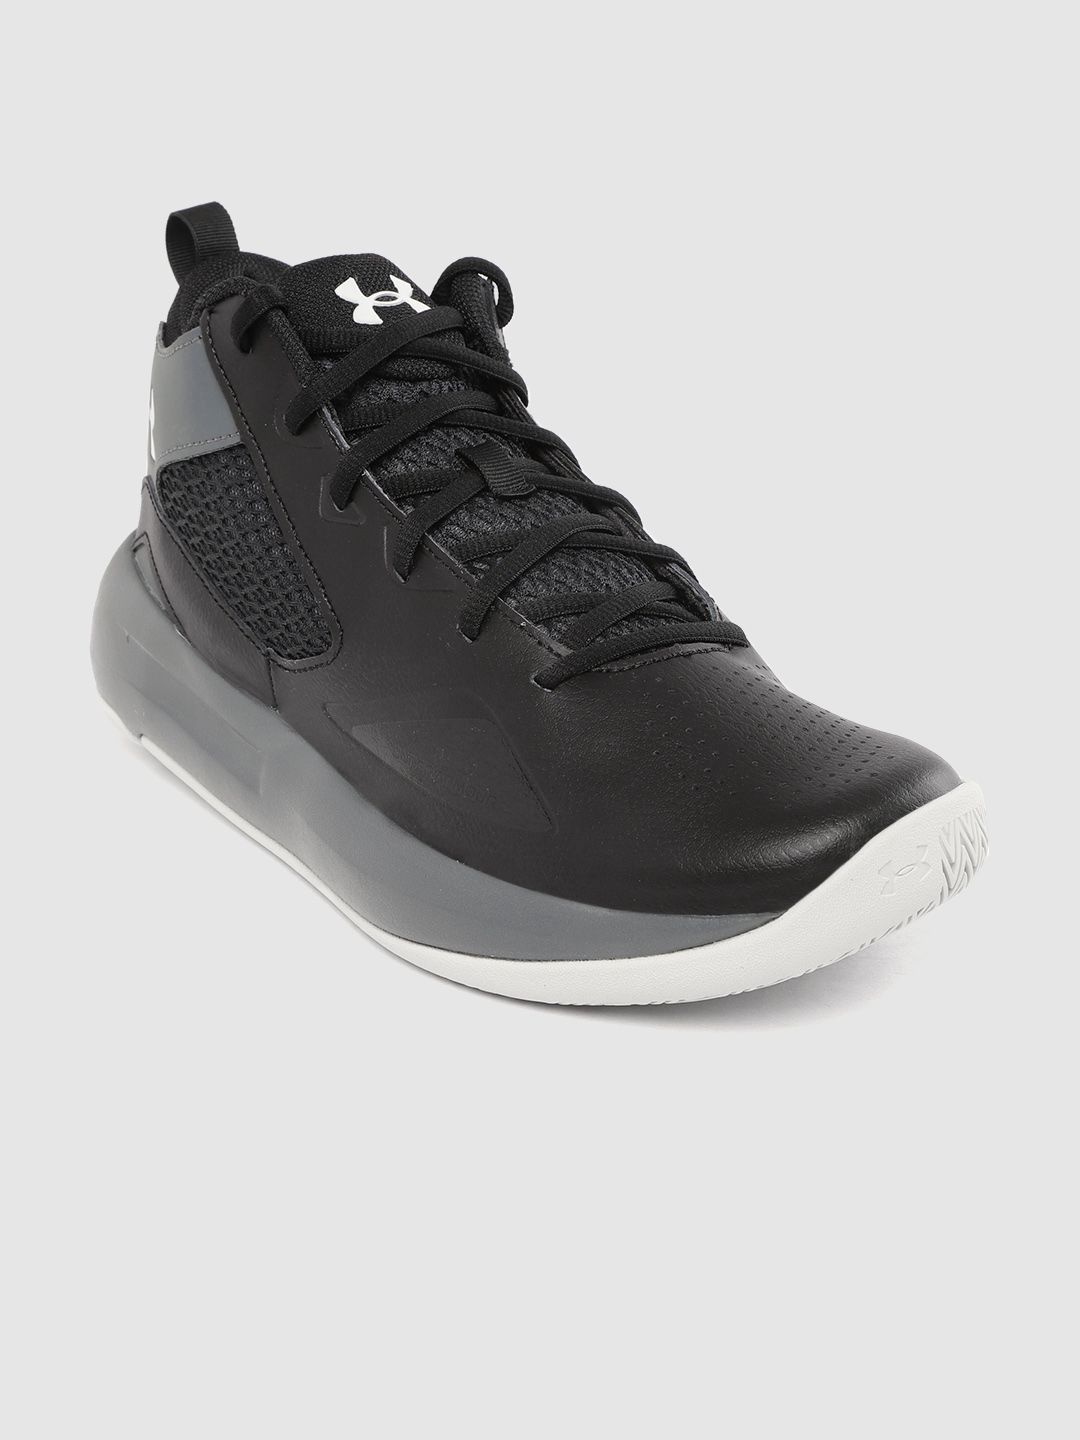 UNDER ARMOUR Men Black Lockdown 5 Perforated Basketball Shoes Price in India